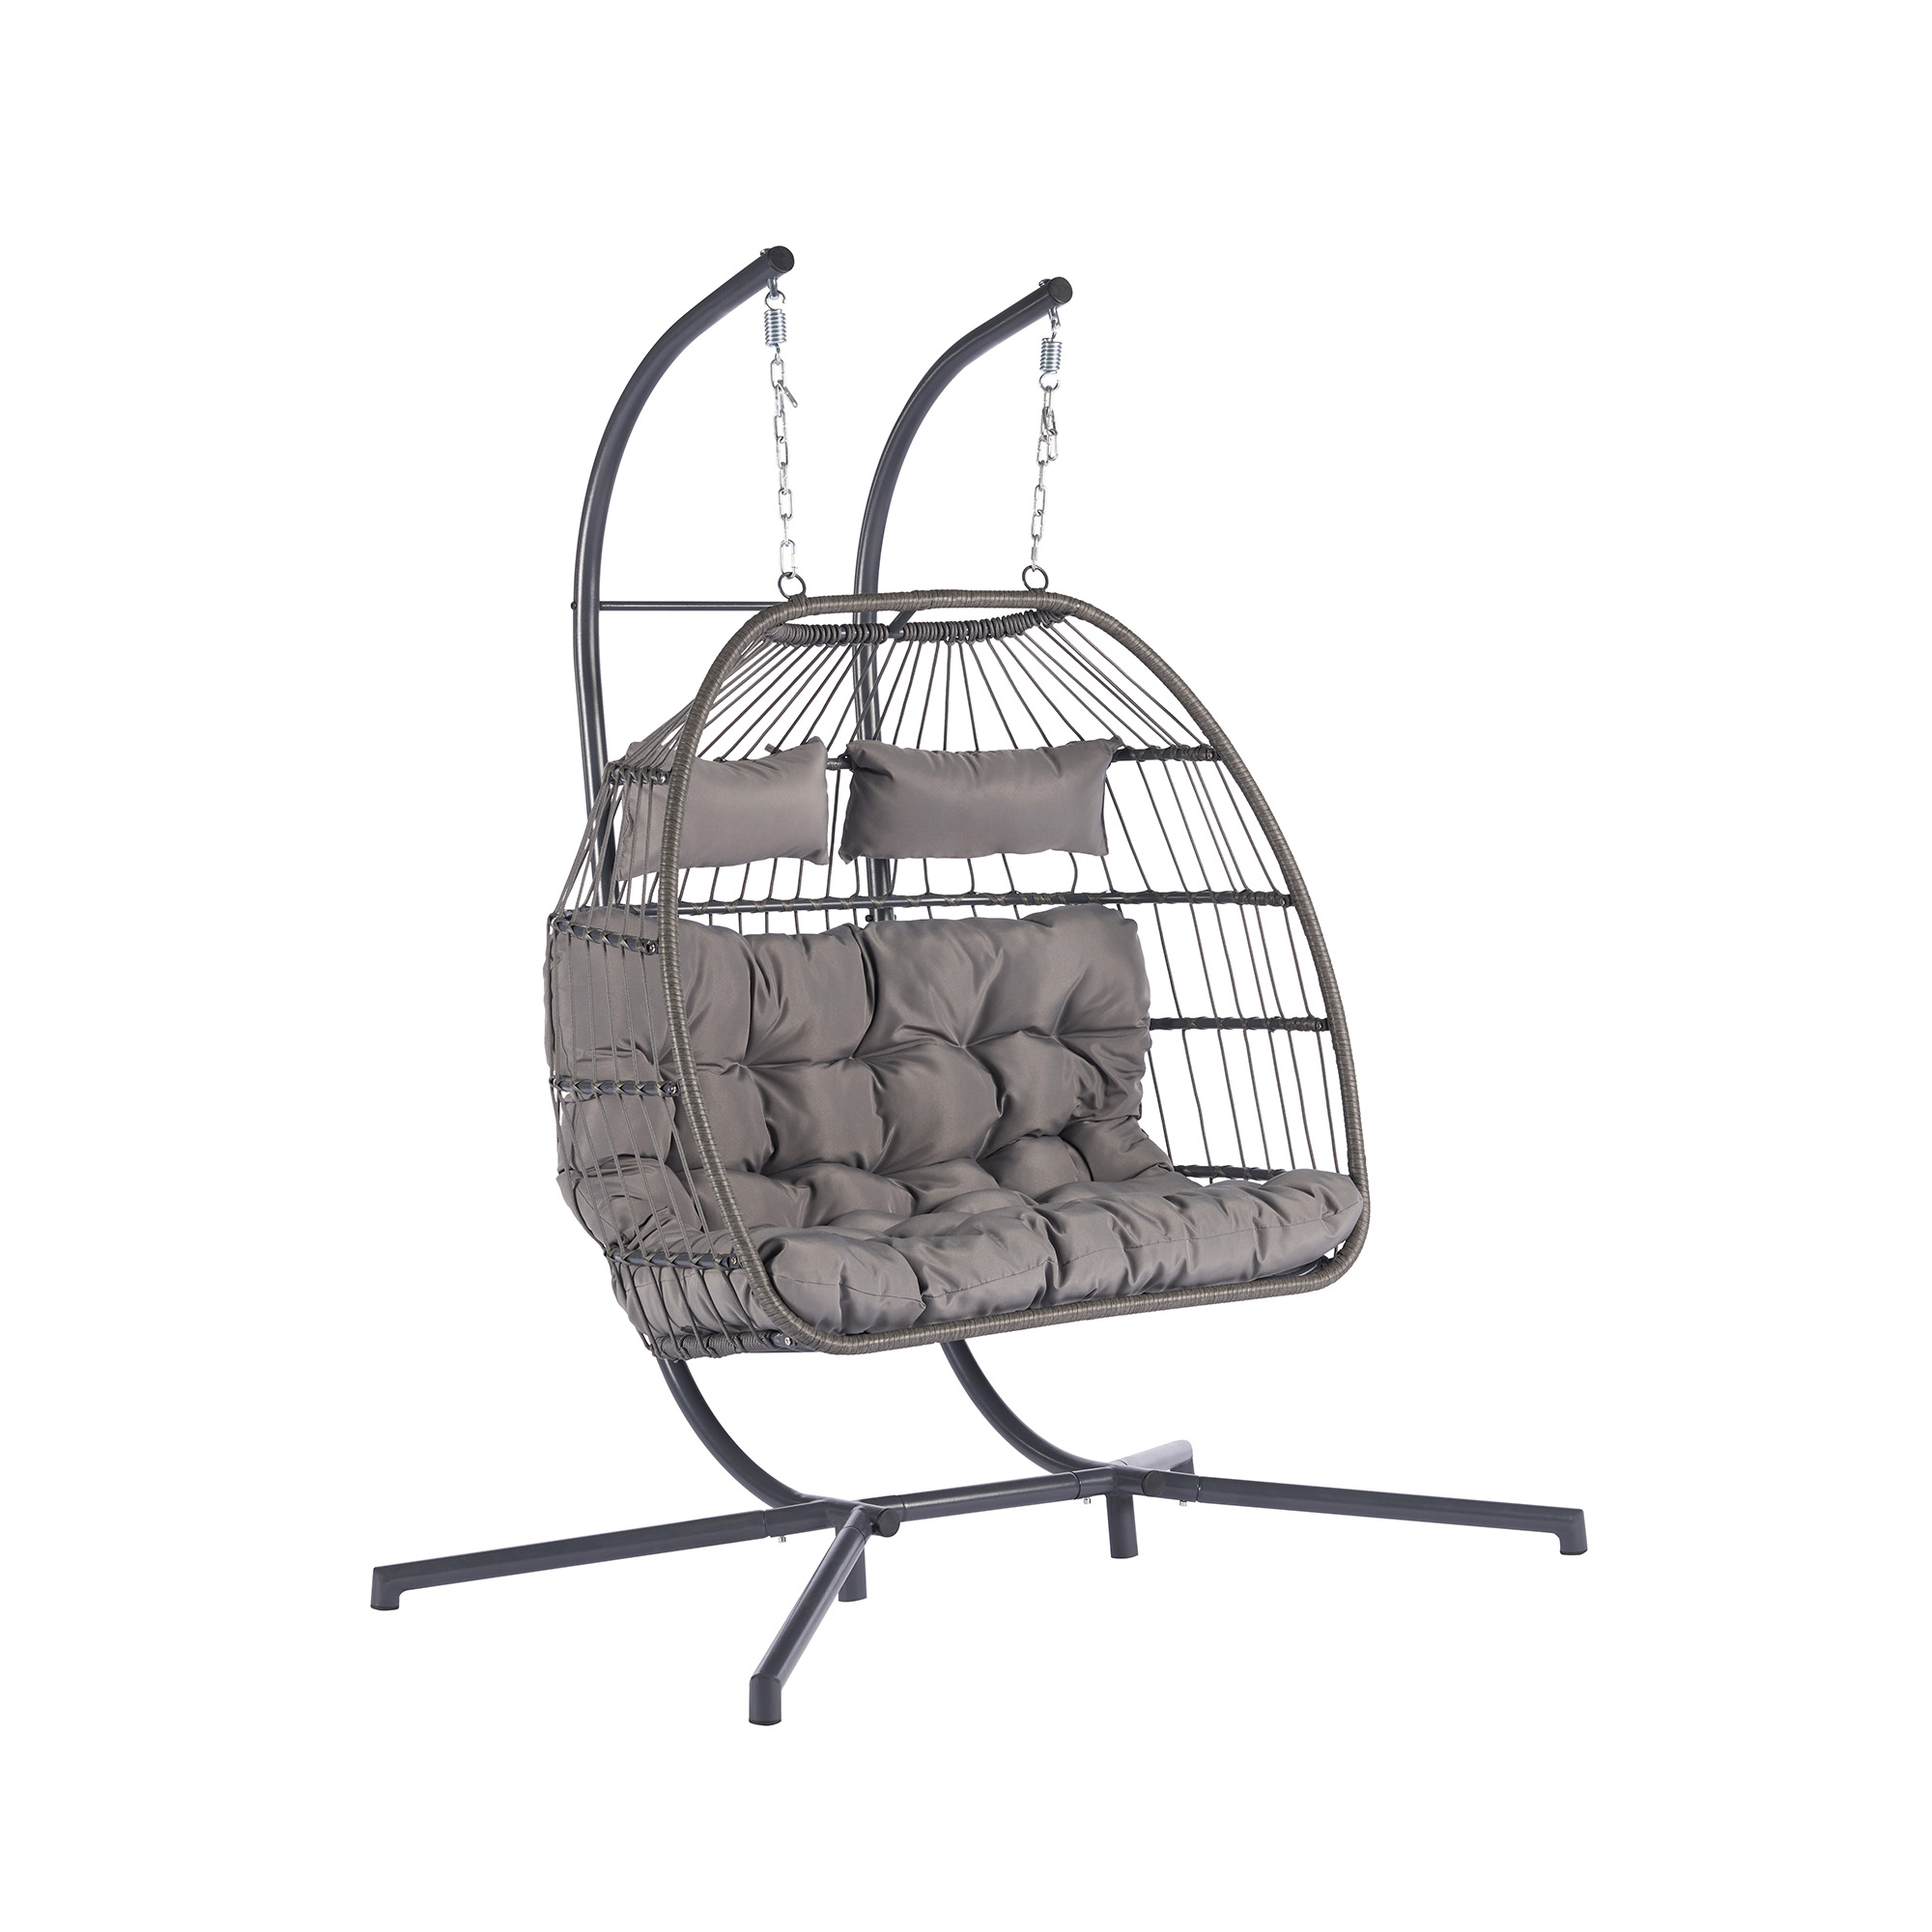 BTMWAY 2 Person Wicker Egg Chair with Stand and Removable Cushion, Outdoor Indoor Swing Hammock Chair Hanging Basket Chair for Patio Balcony Porch Living Room, Light Gray - image 4 of 9